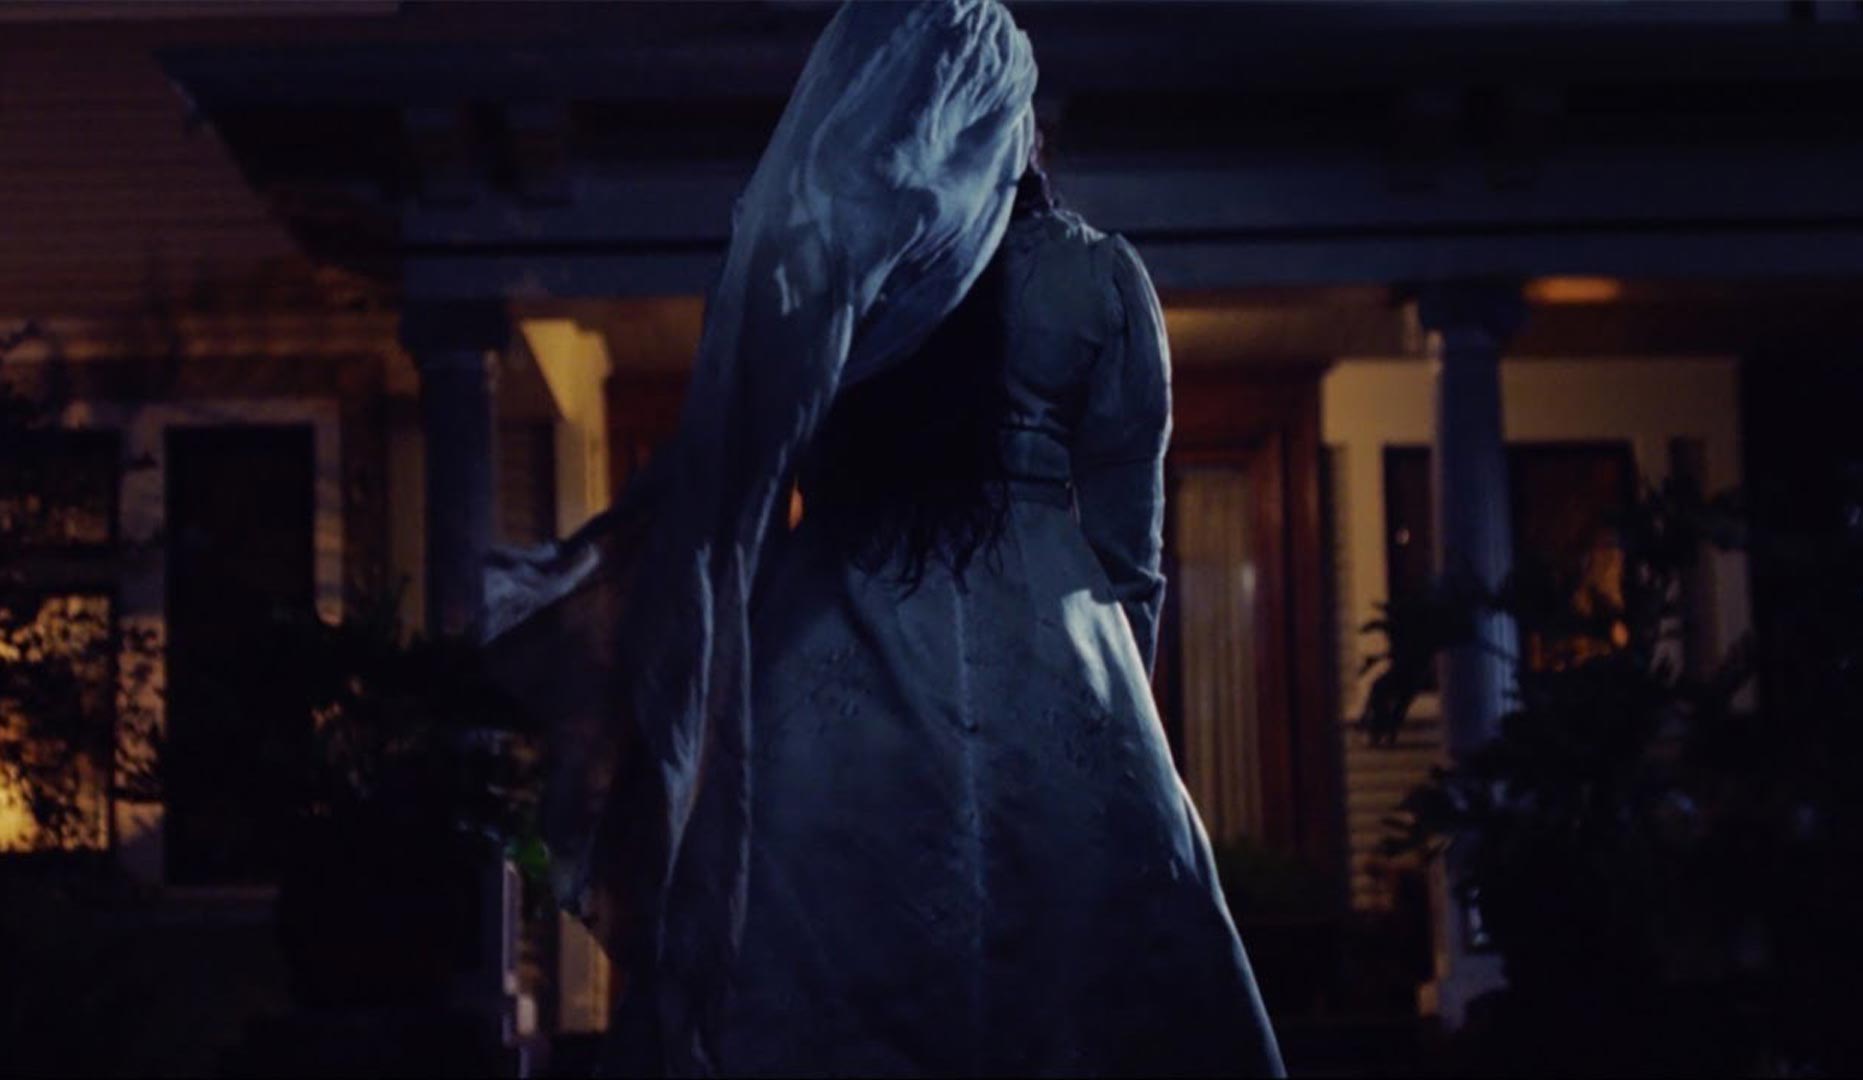 Hear Her Cries: Evil Has No Bounds In The New 'The Curse Of La Llorona' Trailer